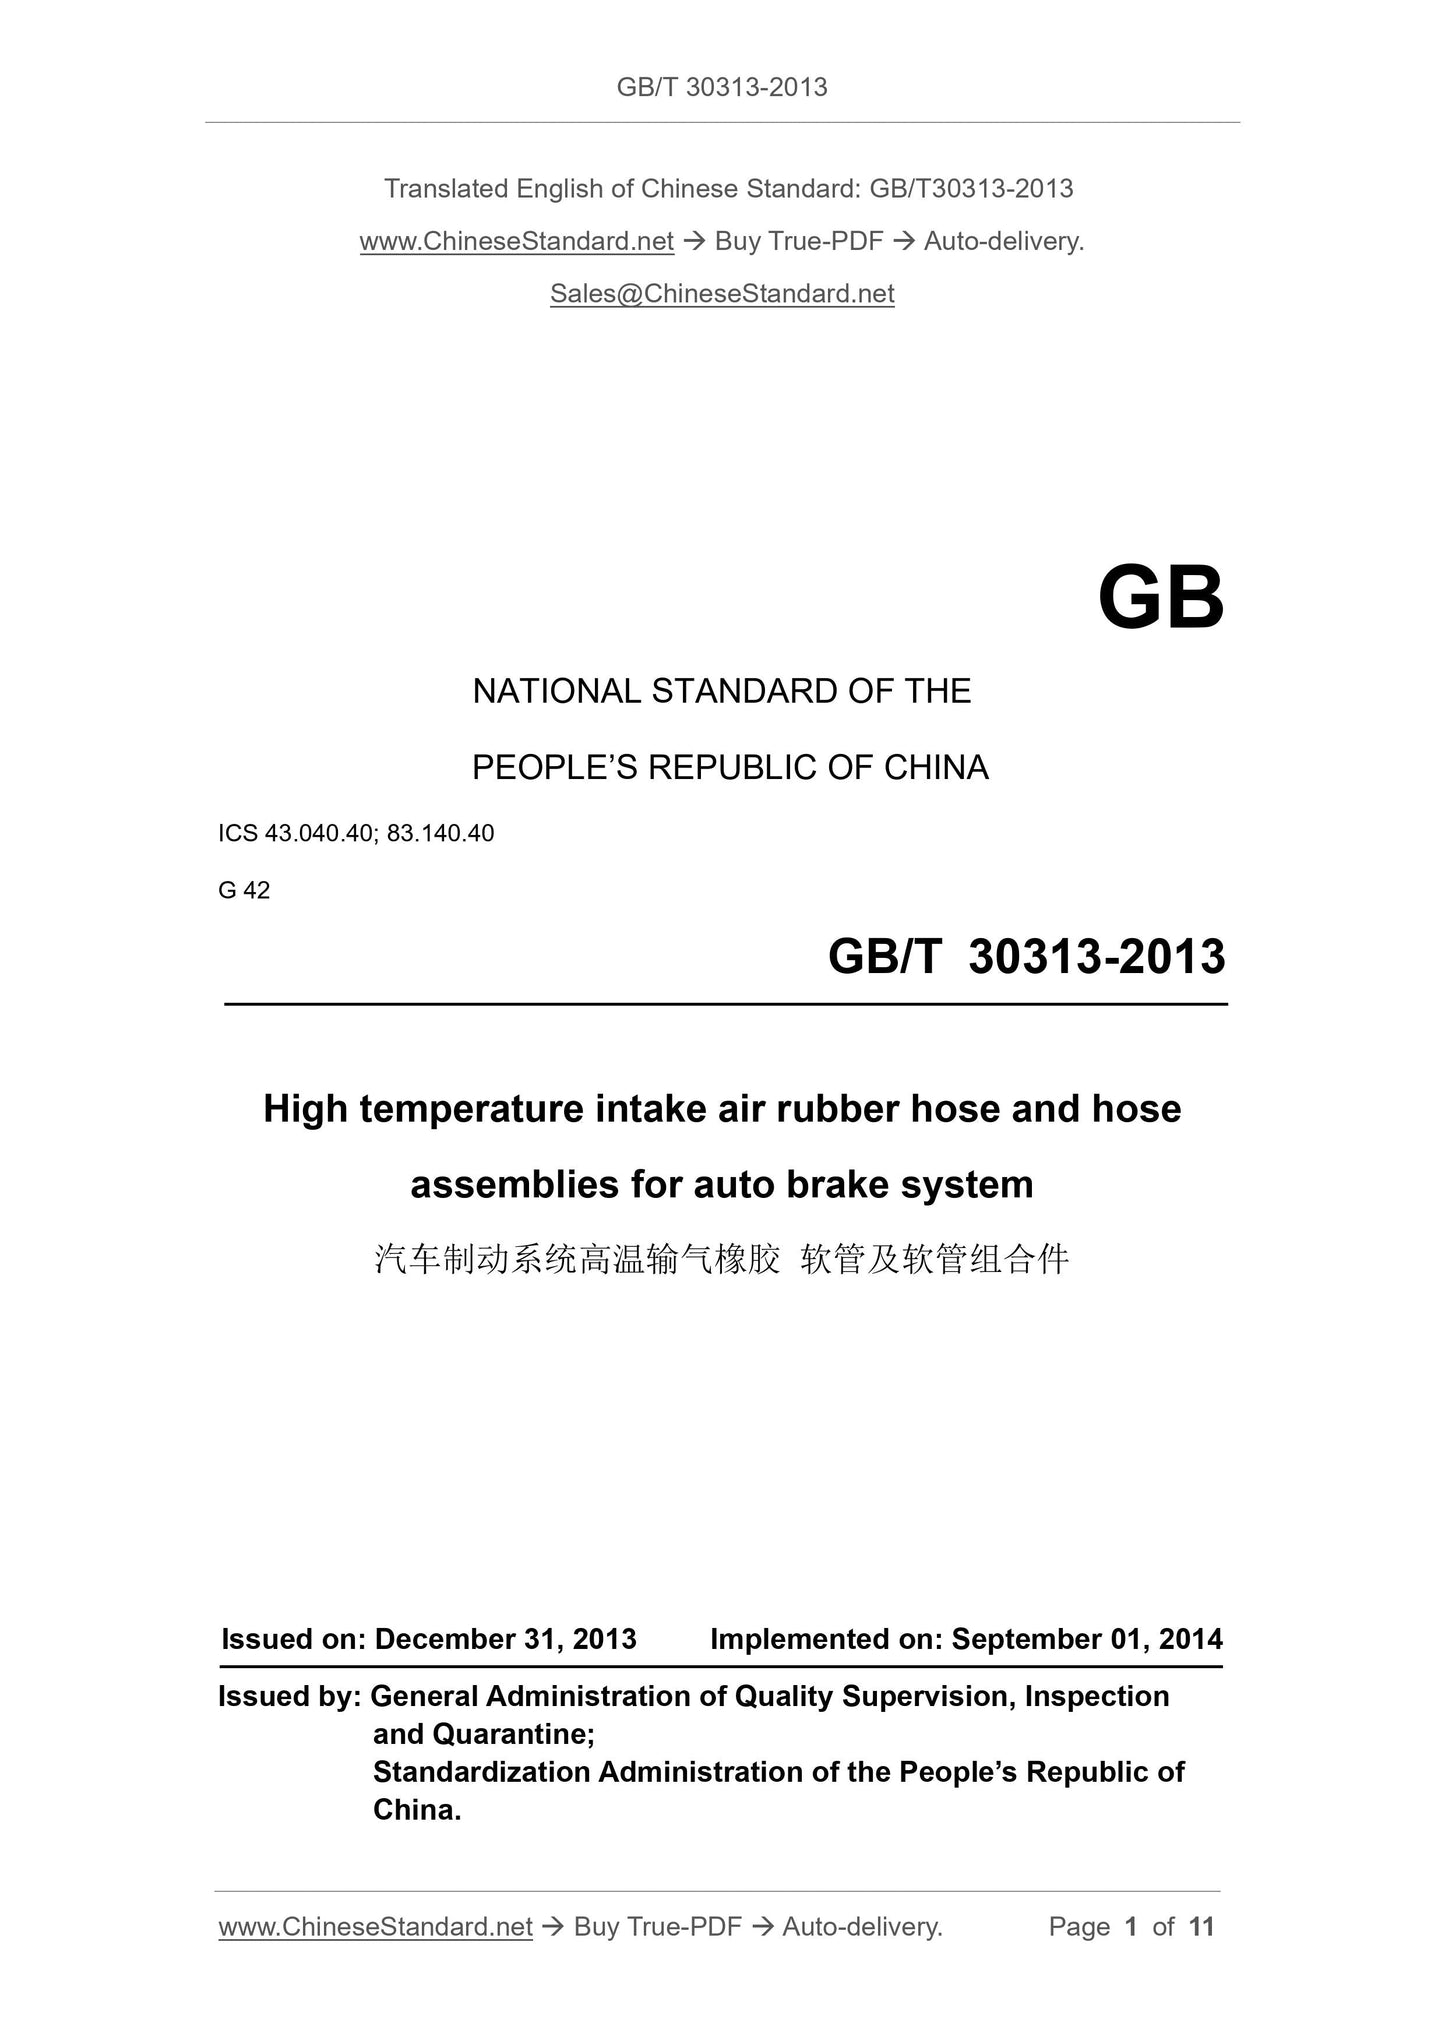 GB/T 30313-2013 Page 1